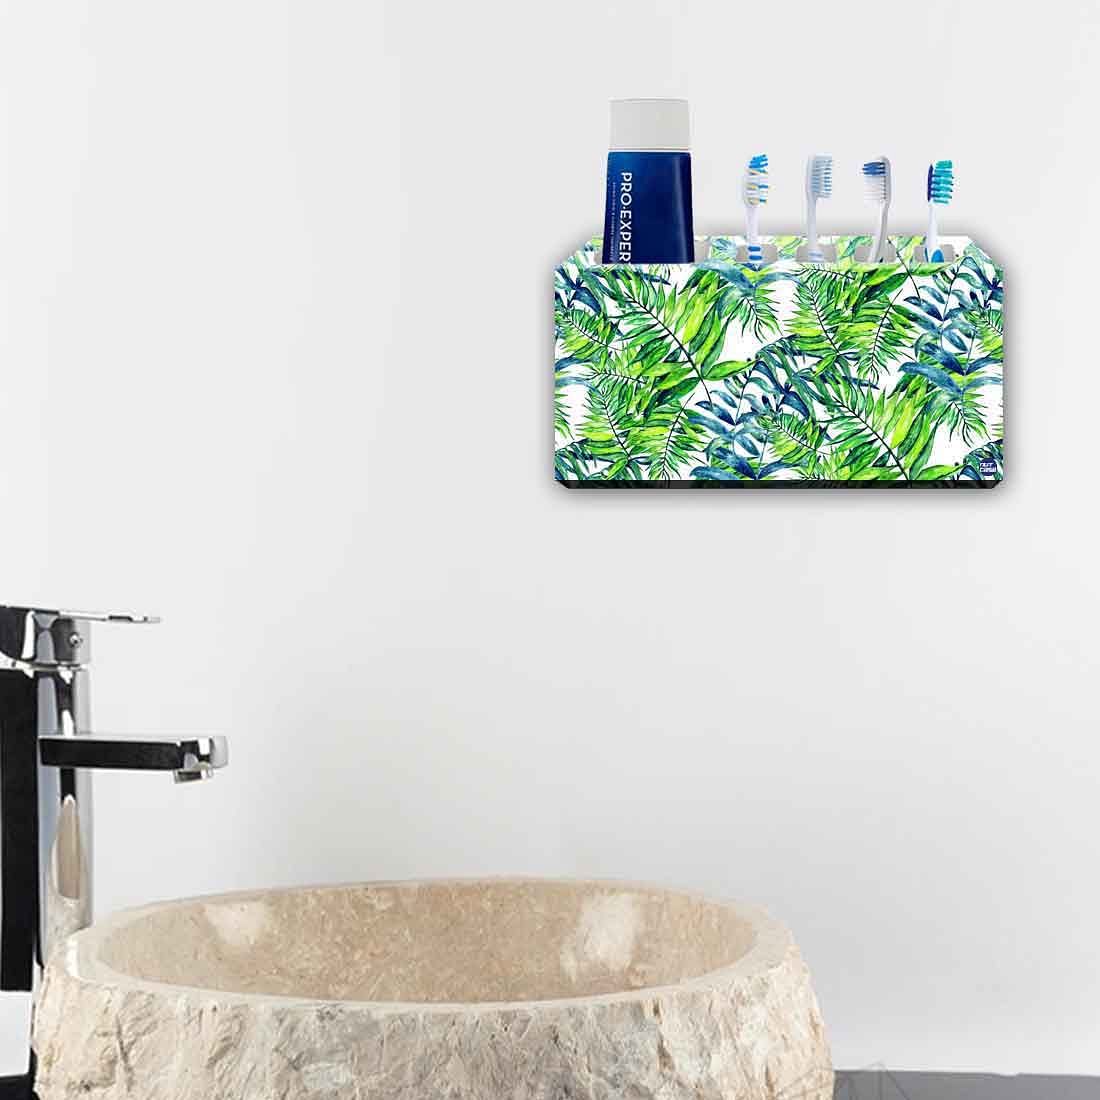 Toothbrush Holder Wall Mounted -Green Leaf Nutcase